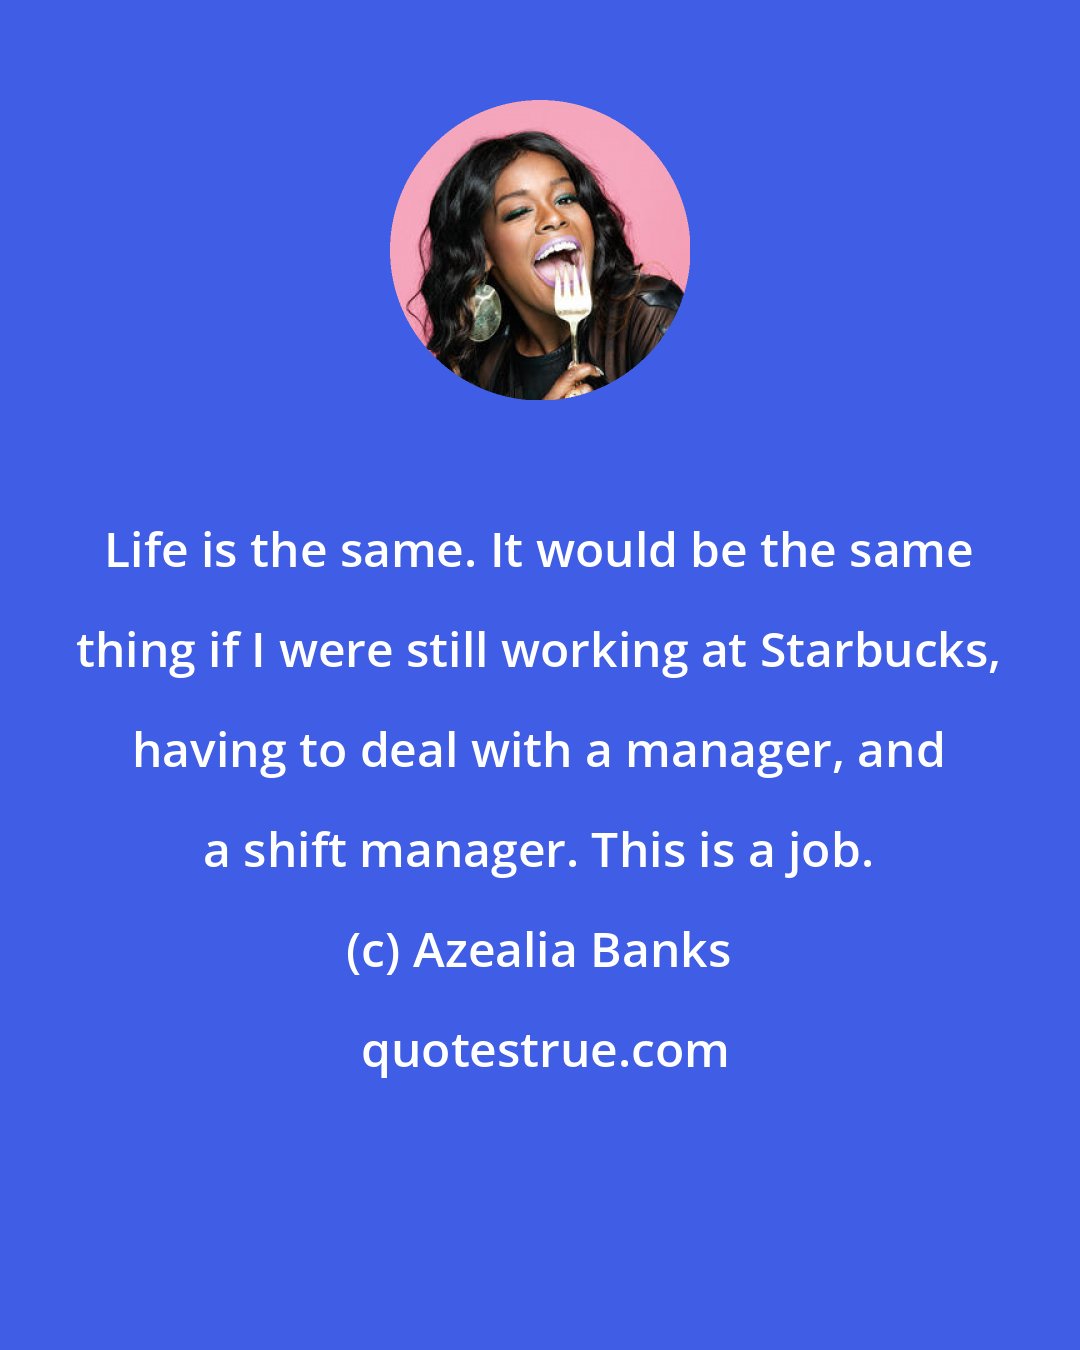 Azealia Banks: Life is the same. It would be the same thing if I were still working at Starbucks, having to deal with a manager, and a shift manager. This is a job.